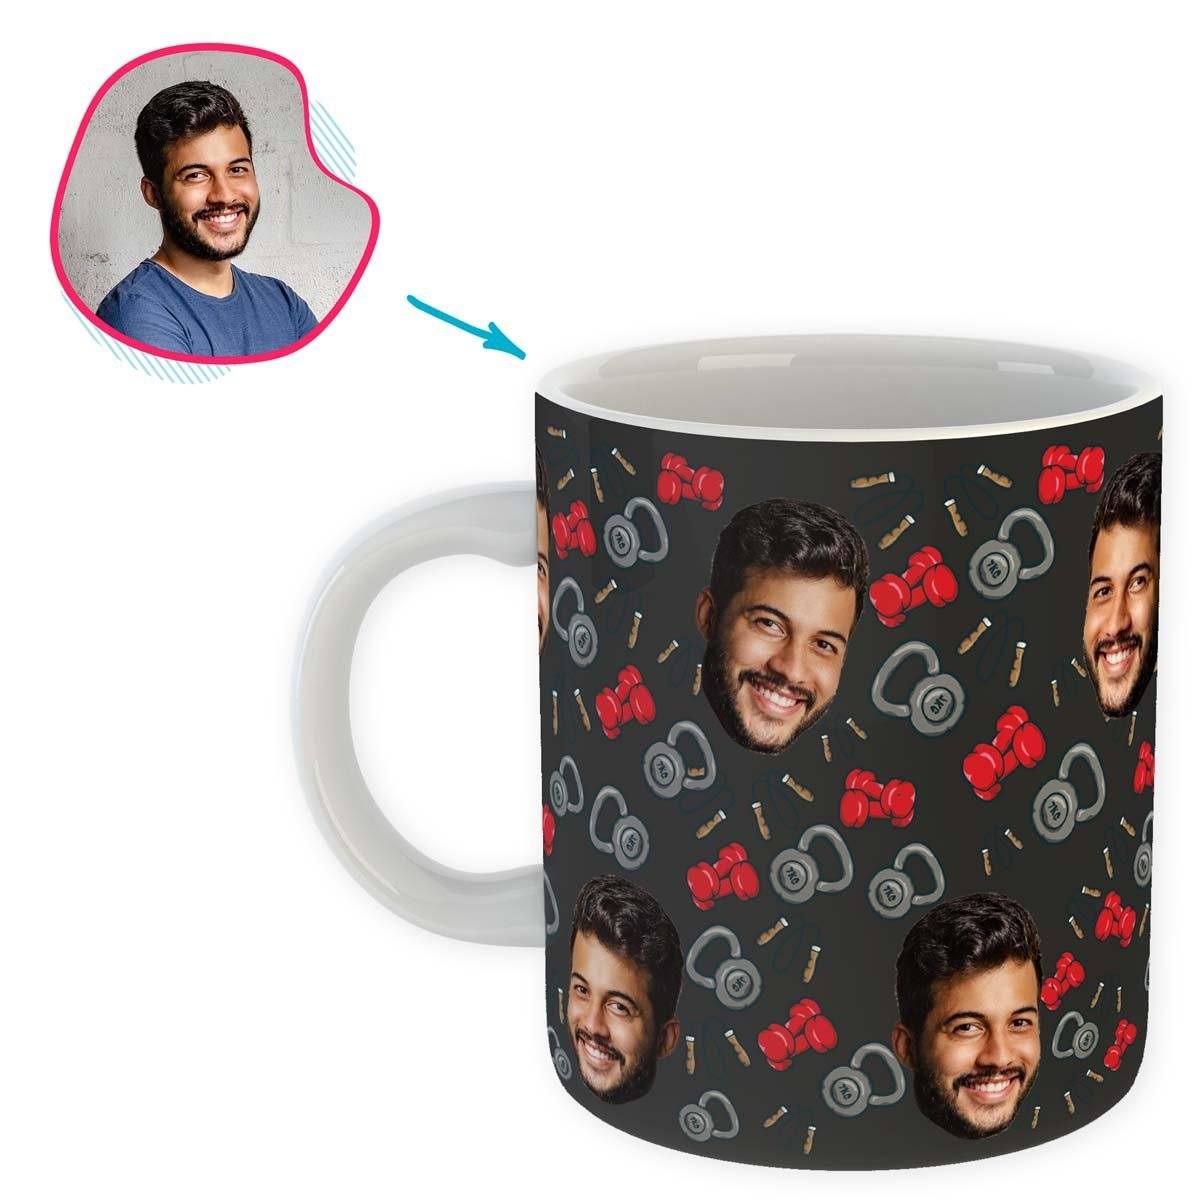 dark Gym & Fitness mug personalized with photo of face printed on it